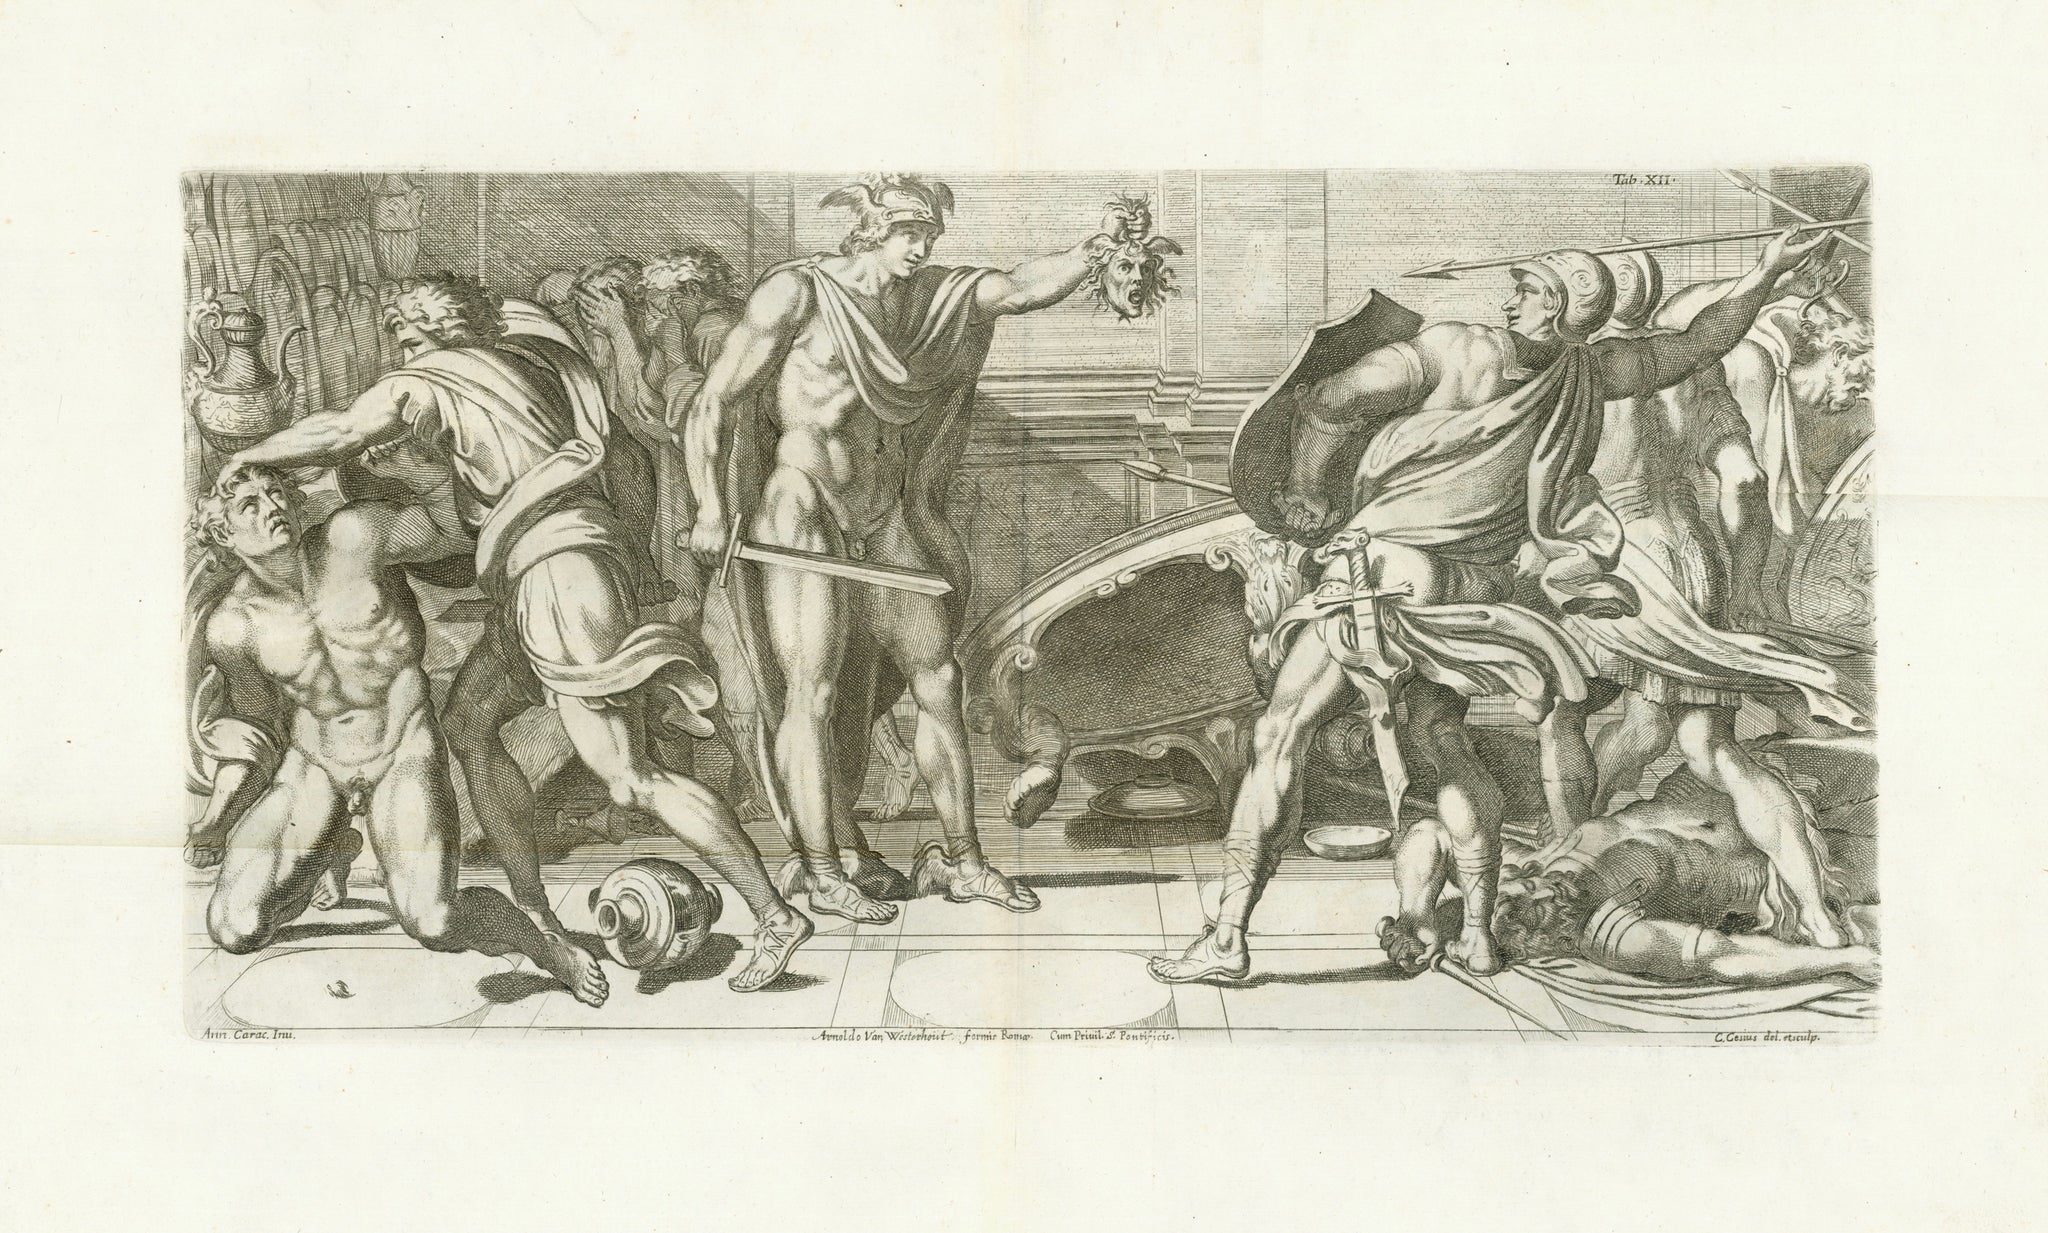 Perseus fighting against Phineus  Copper etching by Carlo Cesio (1626-1686)  Design by Arnold van Westerhout (1651-1725)  After the fresco in Galeria Farnese in Rome by Annibale Carracci (1560-1609)  Published in "GALERIA NEL PALAZZO FARNESE IN ROMA DEL SERENISS·DVCA DI PARMA ETC· DIPINTA DA ANNIBALE CARACCI INTAGLIATA DA CARLO CESIO". Plate Nr. XII (12) in this important publication with 44 etchings.  Publisher: Venanzio Monaldini.  Rome, Roma, Rom, 1657  Annibale Carracci, commissioned by Cardinal Odoardo